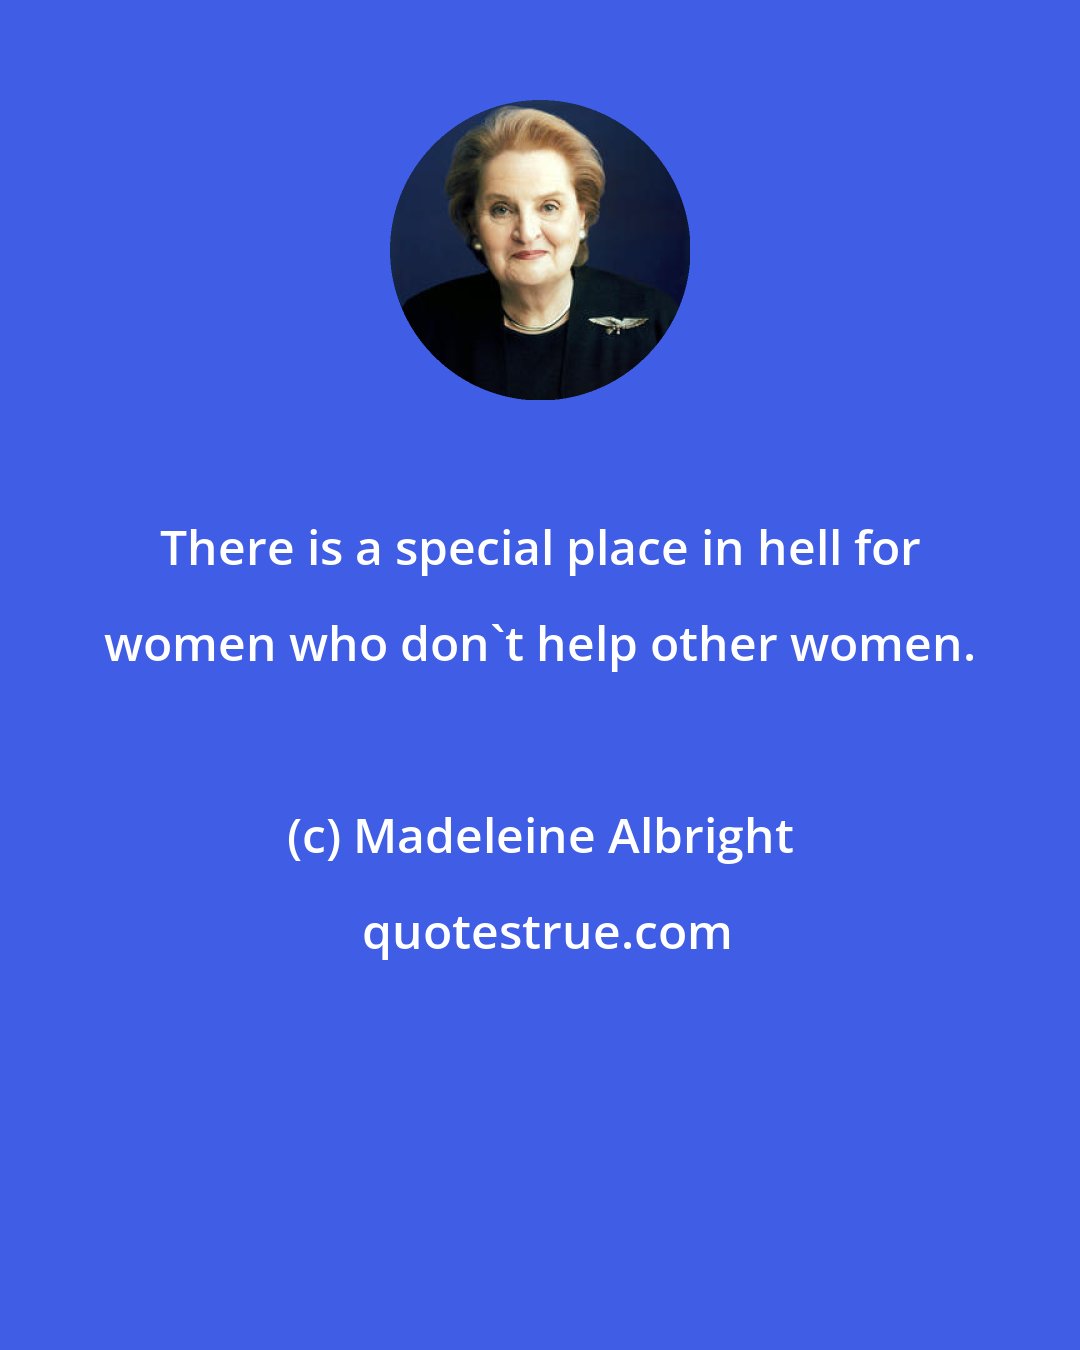 Madeleine Albright: There is a special place in hell for women who don't help other women.